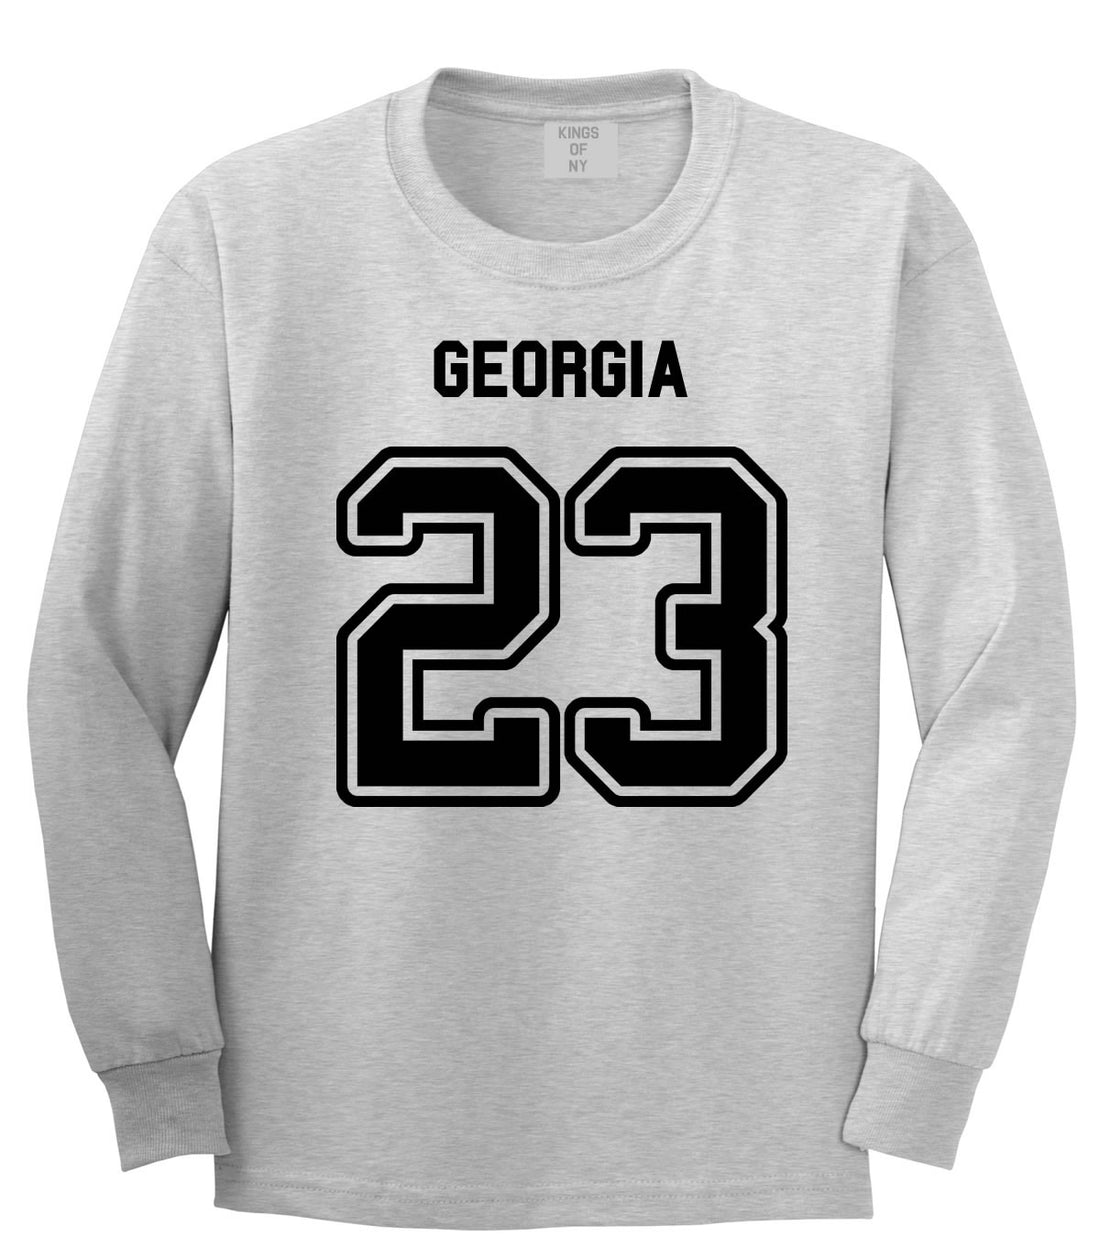 Sport Style Georgia 23 Team State Jersey Long Sleeve T-Shirt By Kings Of NY